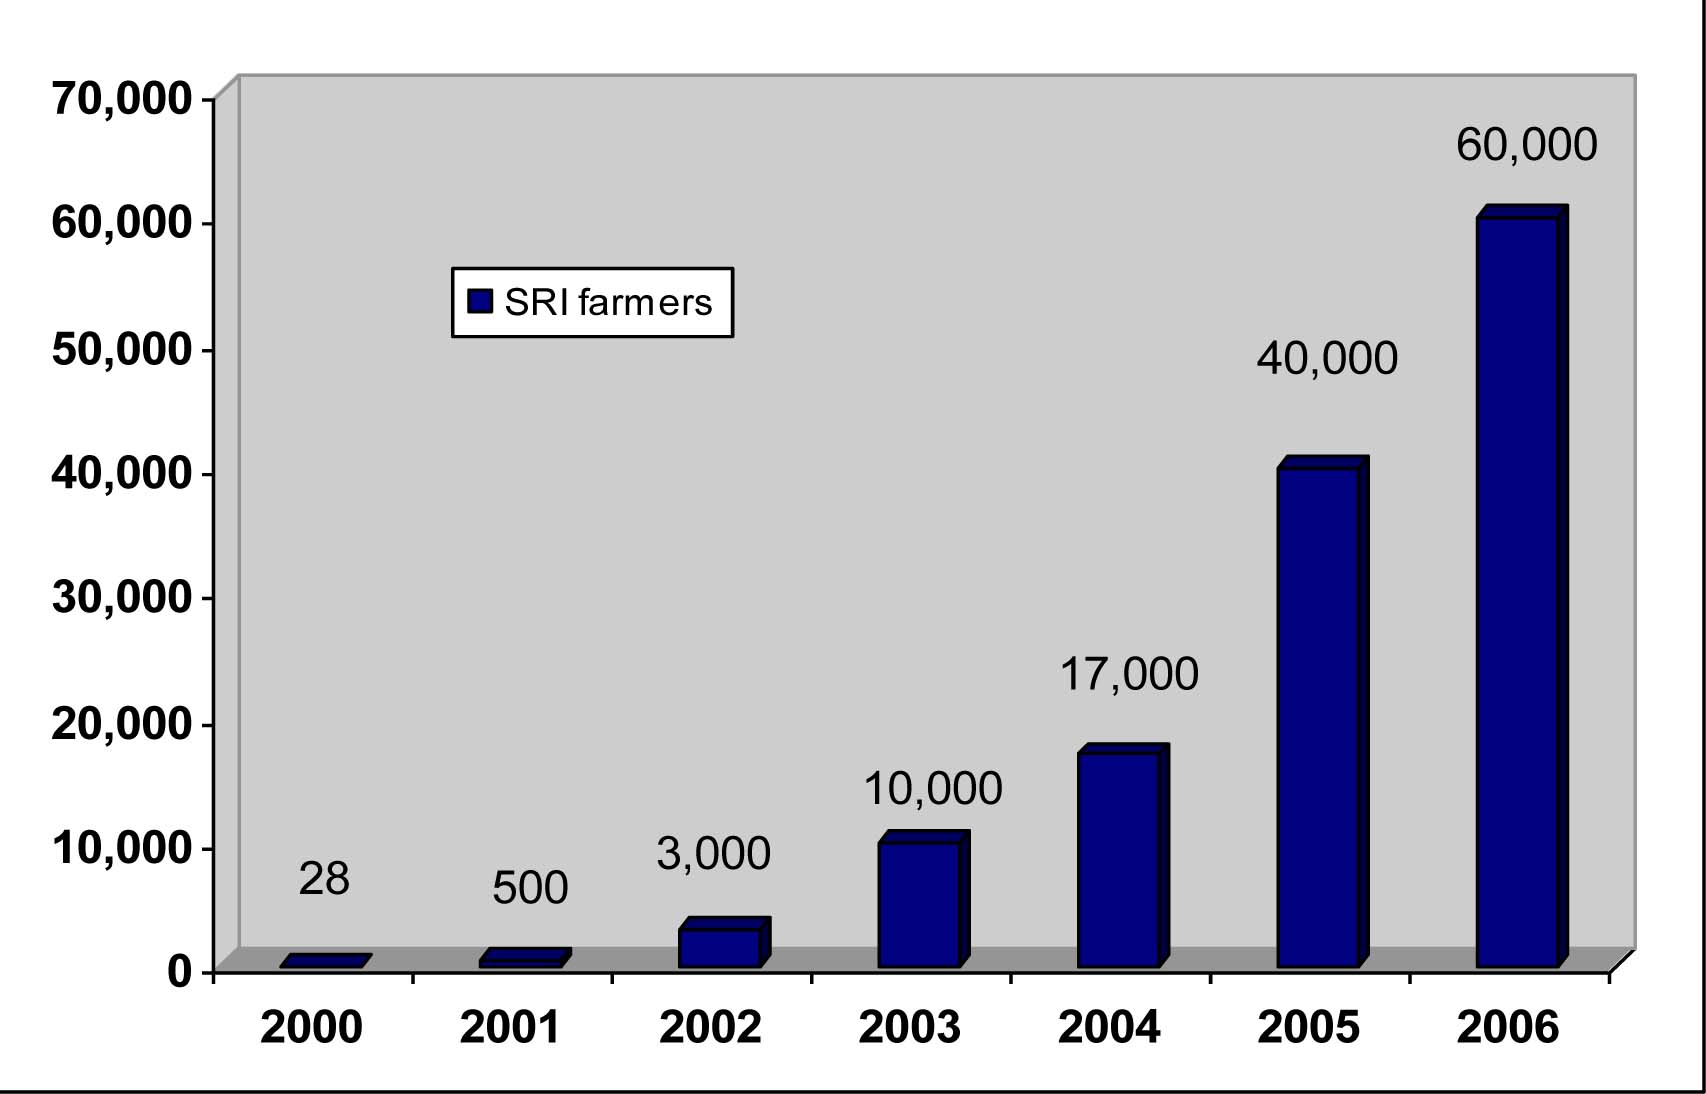 Progress in the number of Cambodian SRI rice farmers 2000-2006. Source: CEDAC report